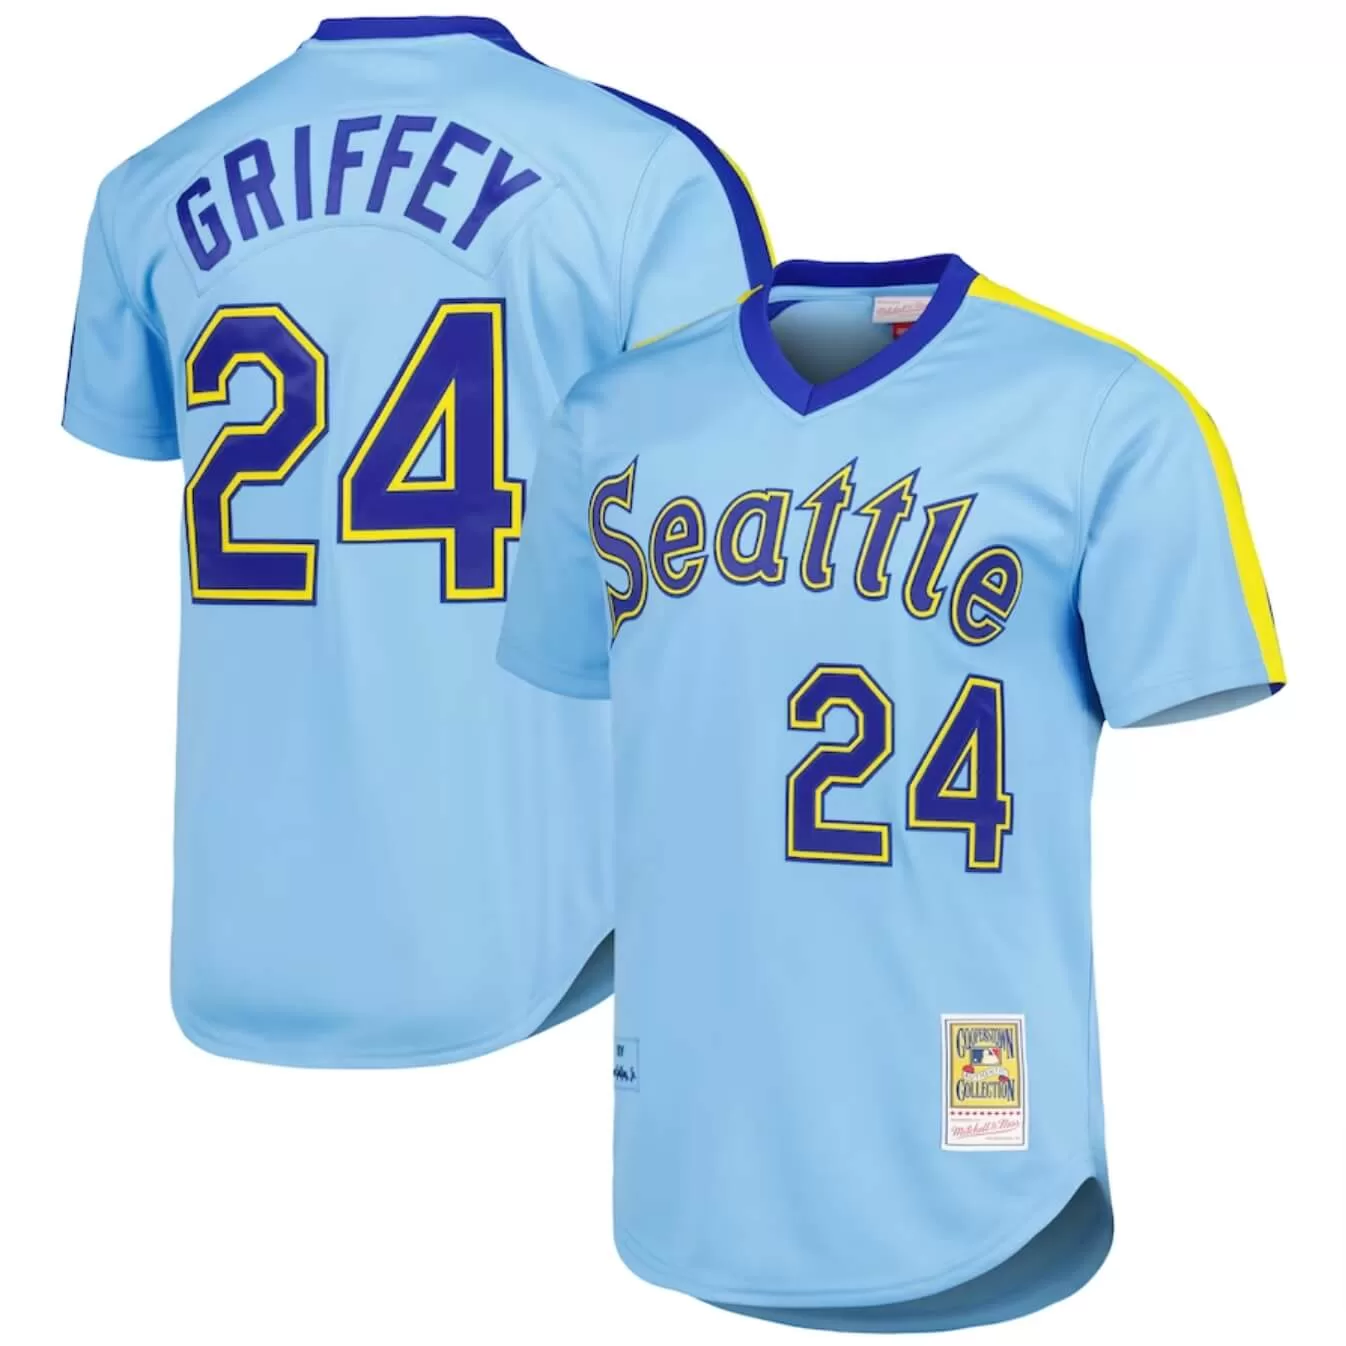 Ken Griffey Jr. – Cooperstown Collection Authentic Jersey